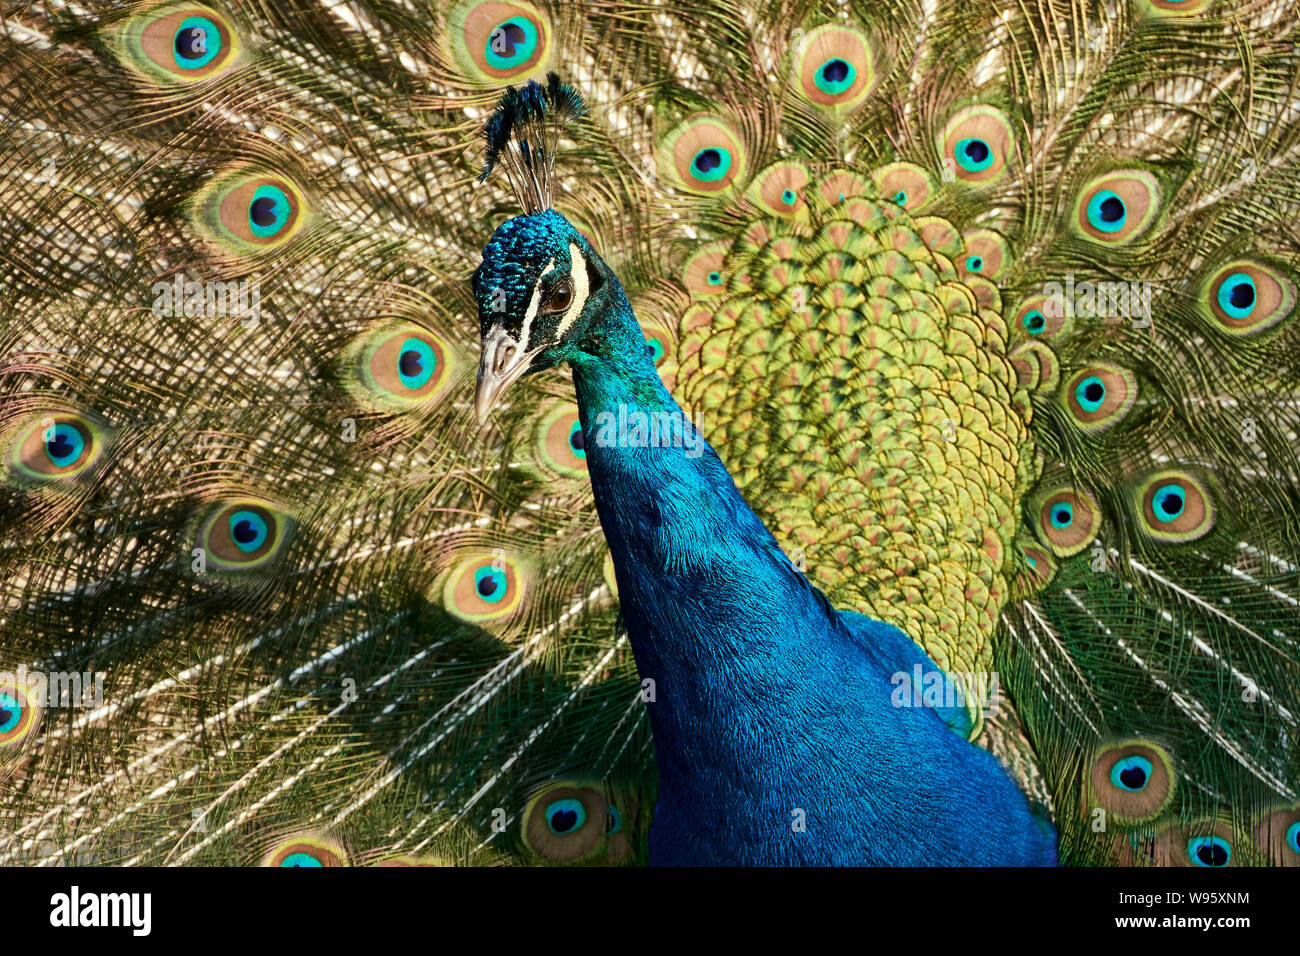 Closeup of a blue Indian peafowl (Pavo cristatus) shwoing feathers and eyespots Stock Photo